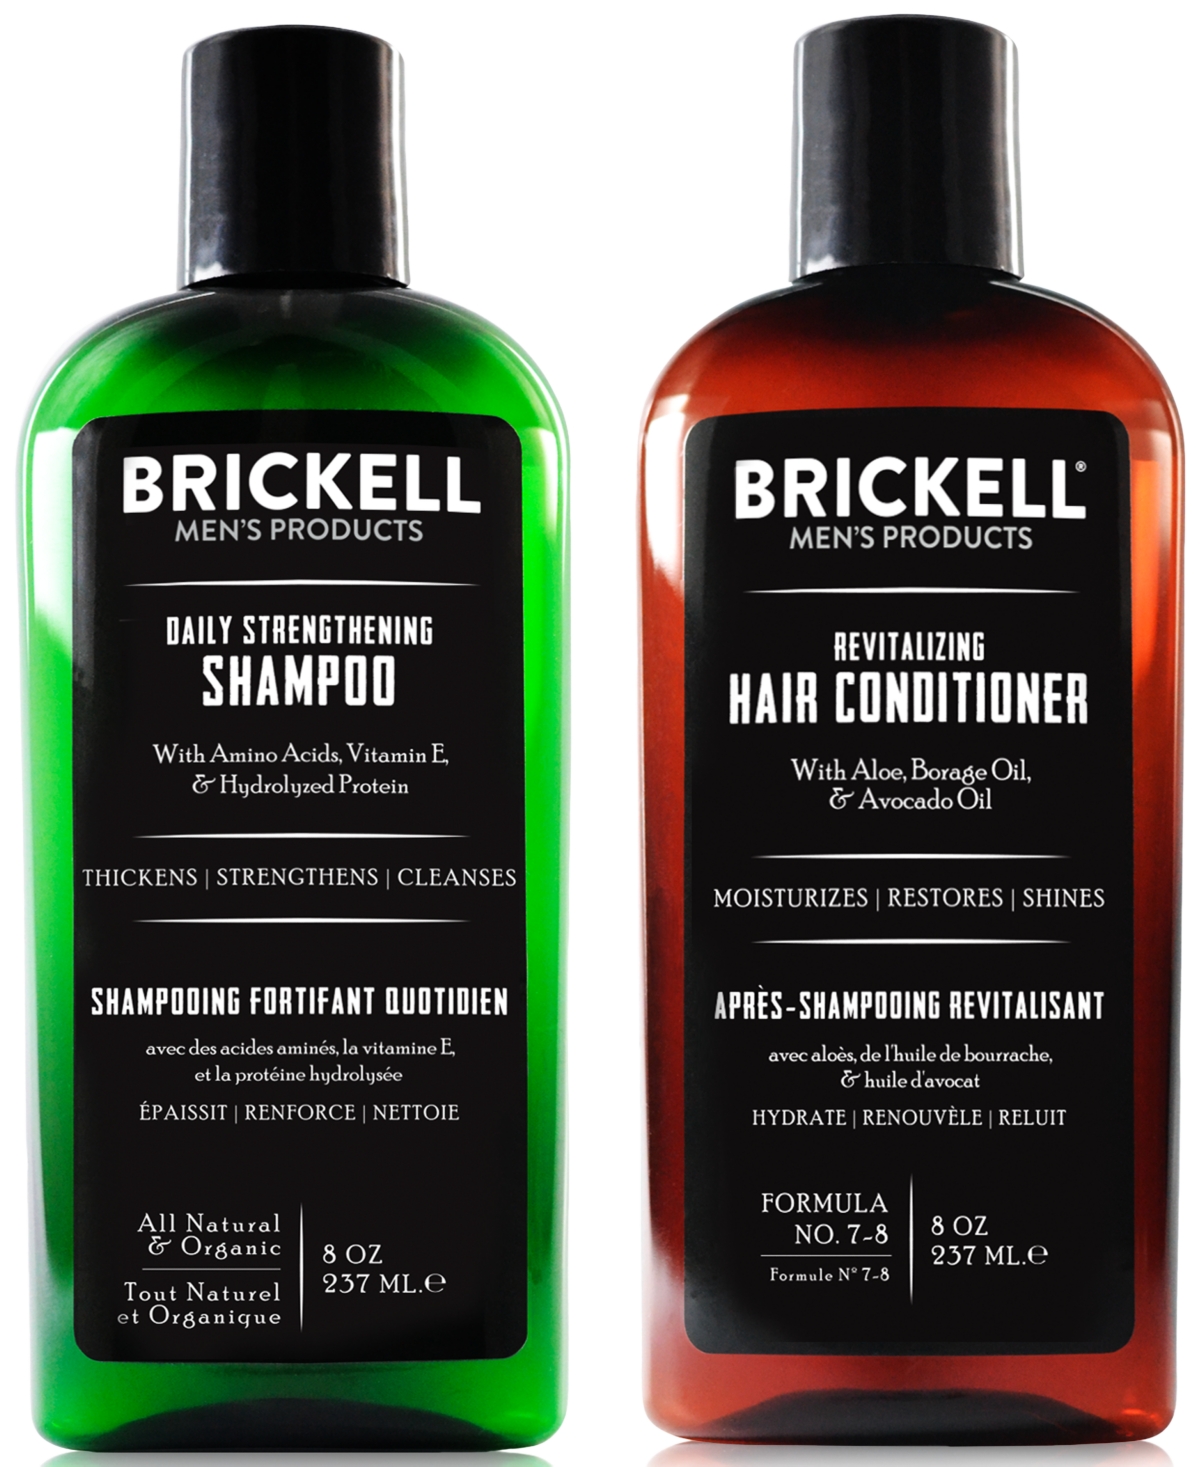 Brickell Mens Products Brickell Men's Products 2-pc. Men's Daily Revitalizing Hair Care Set